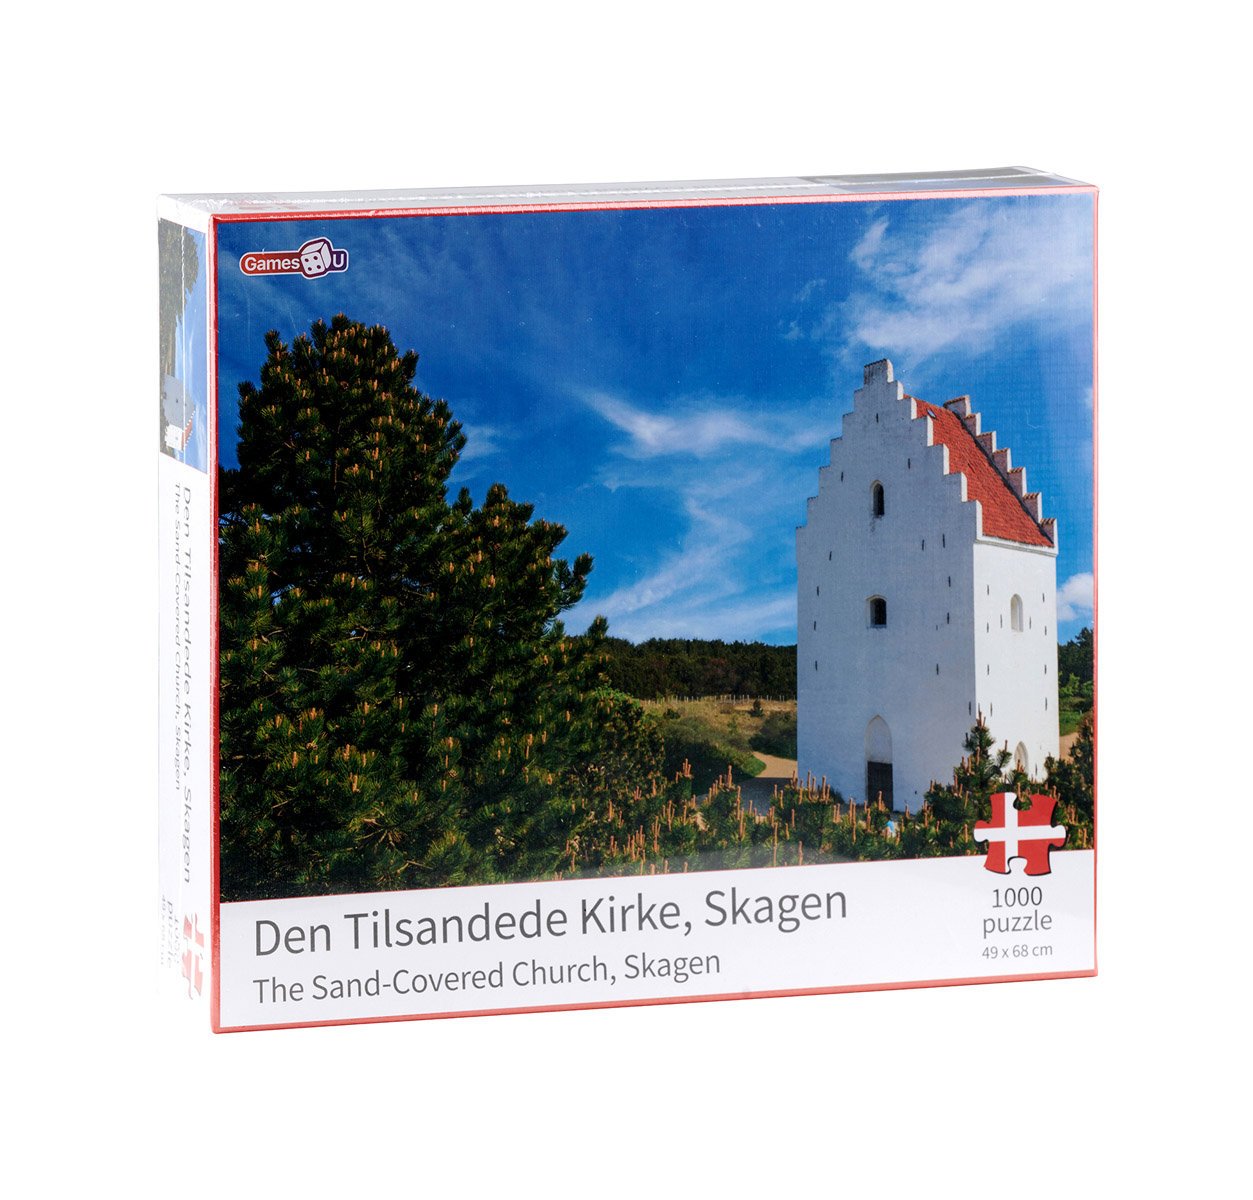 Denmark Puzzle - The Sand-Covered Church in Skagen (1000 pcs.)